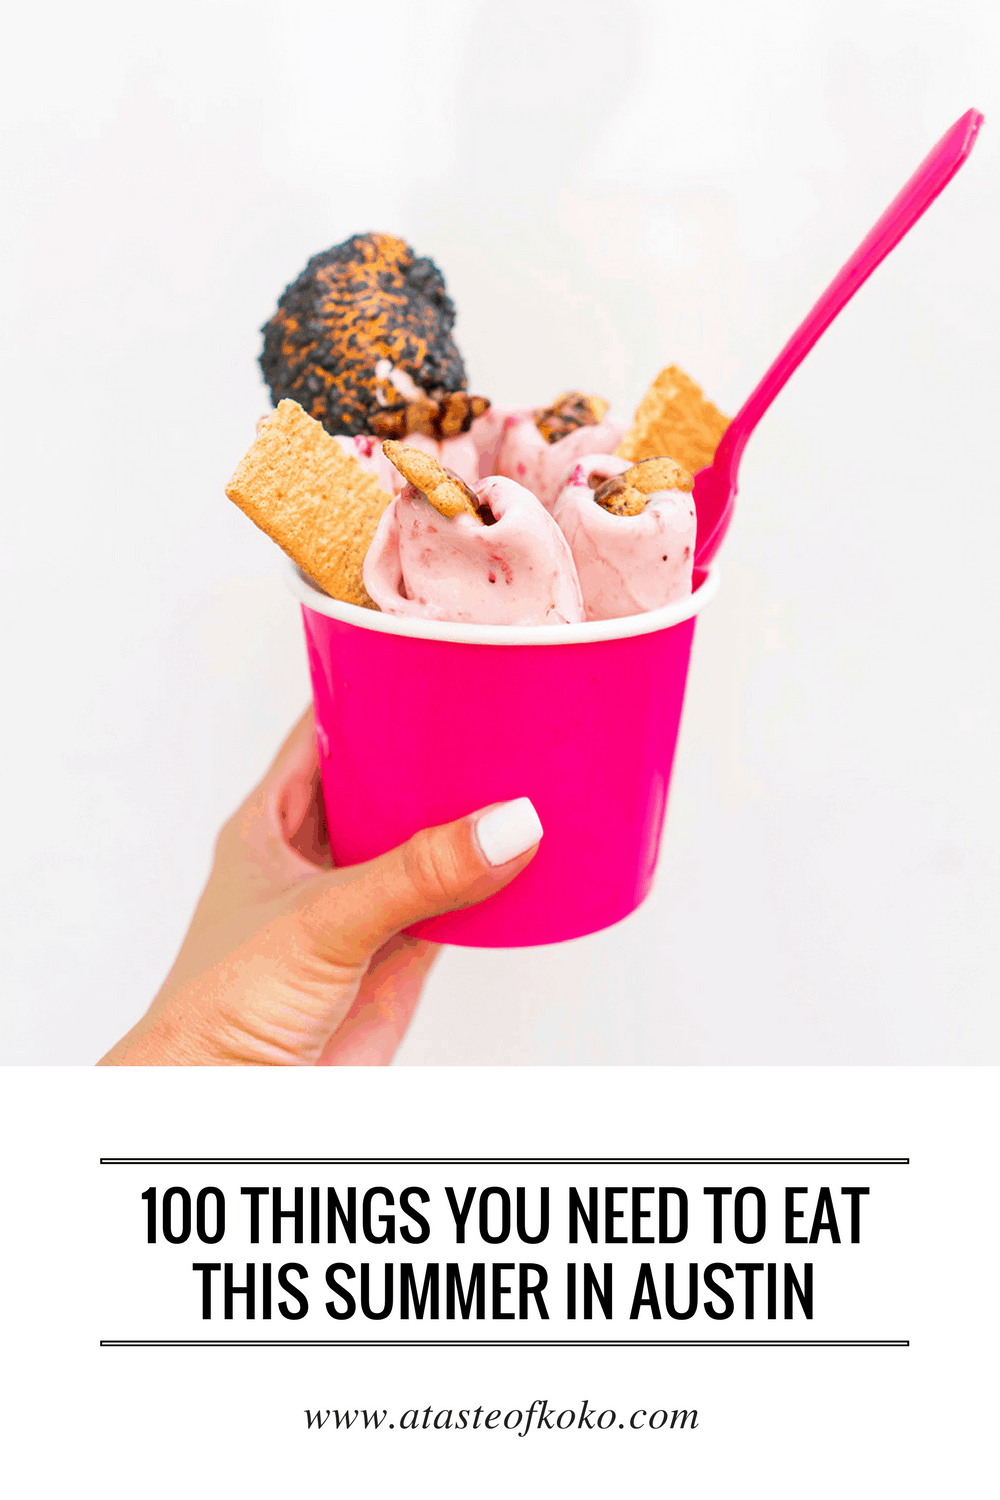 100 Things You Need To Eat This Summer in Austin